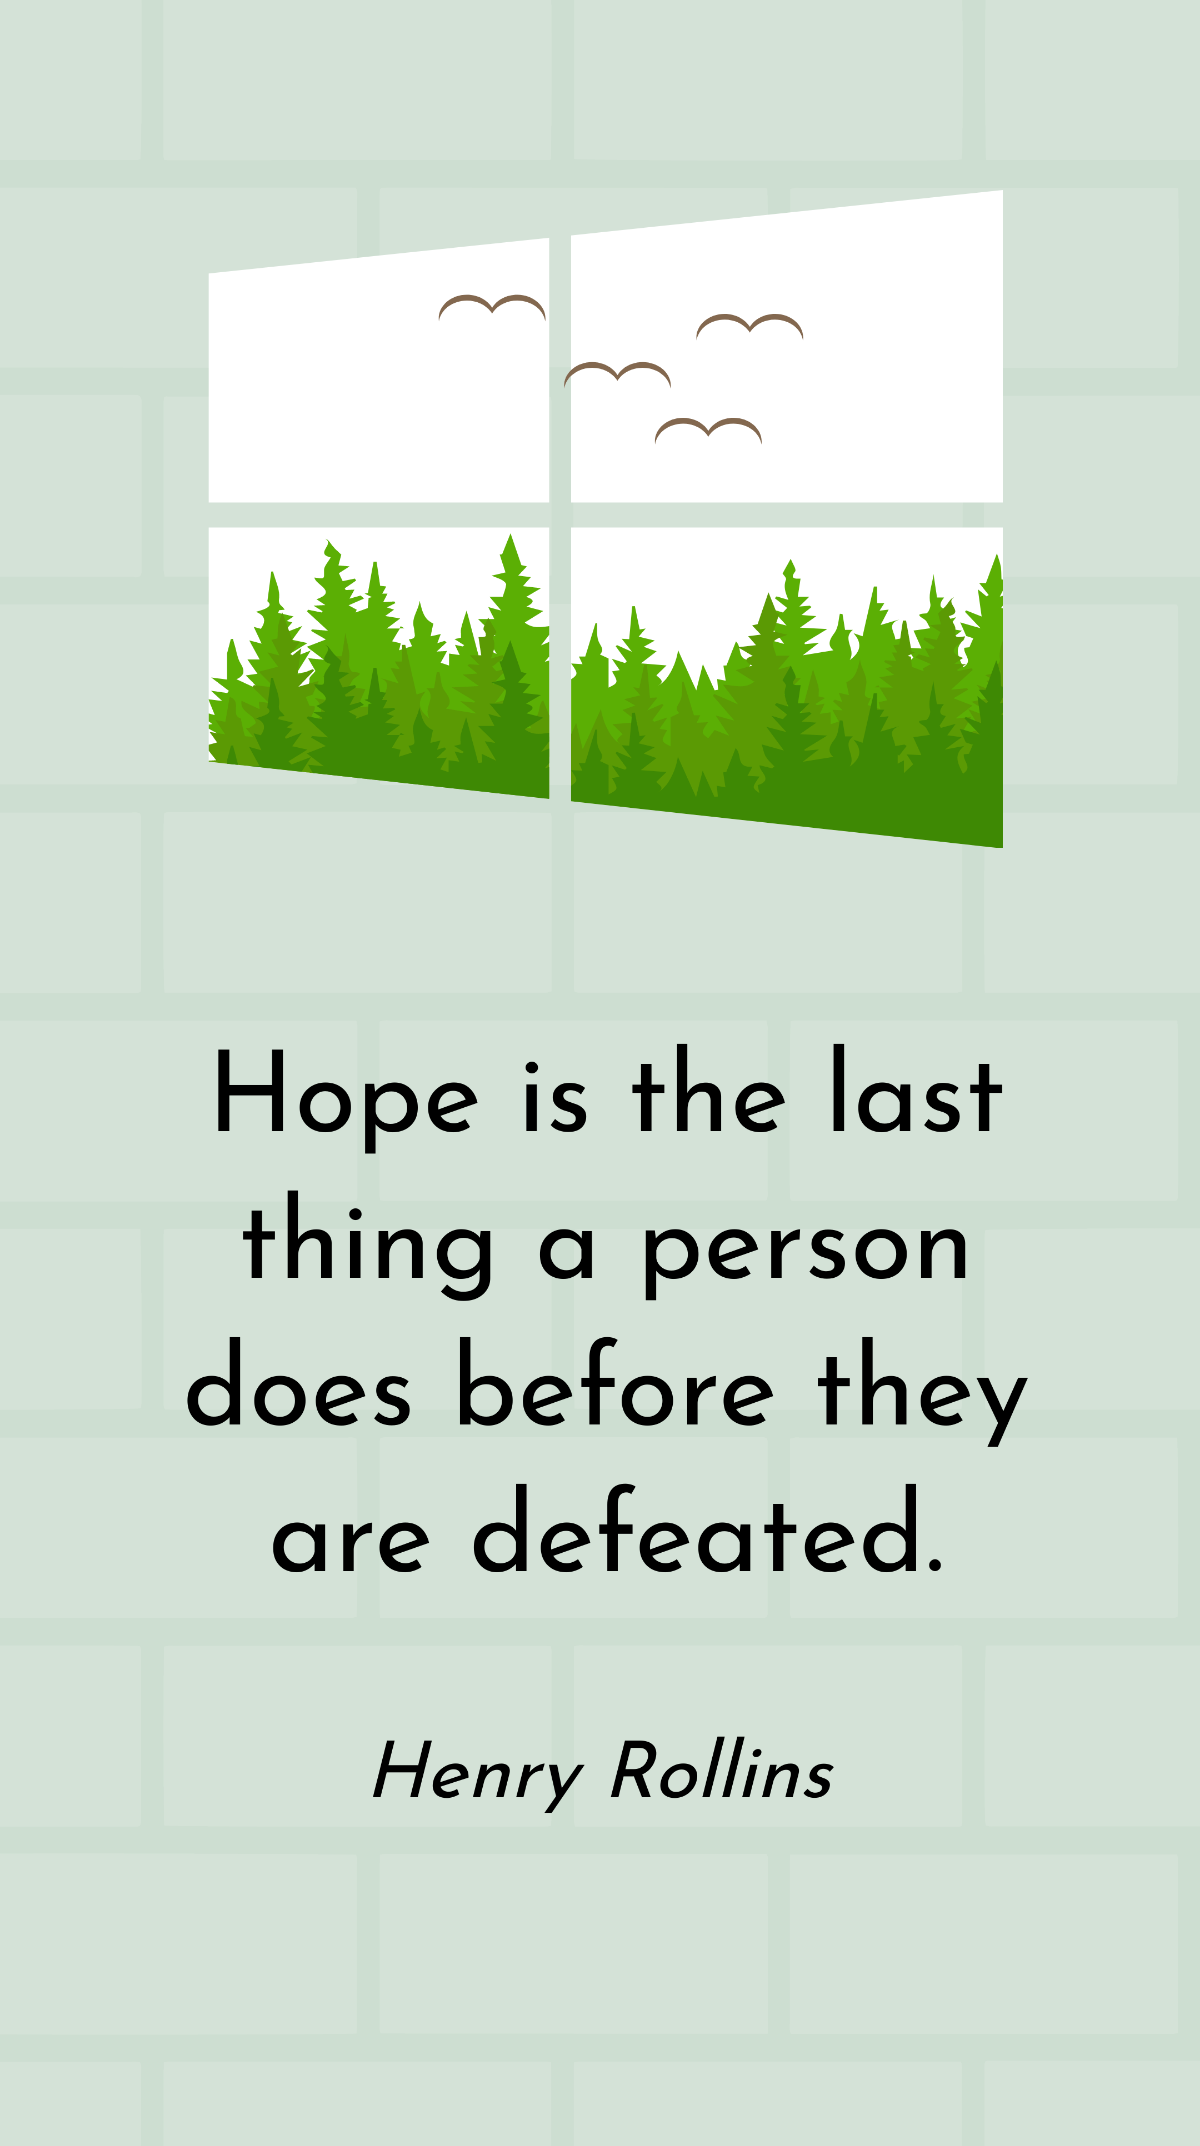 Henry Rollins - Hope is the last thing a person does before they are defeated. Template